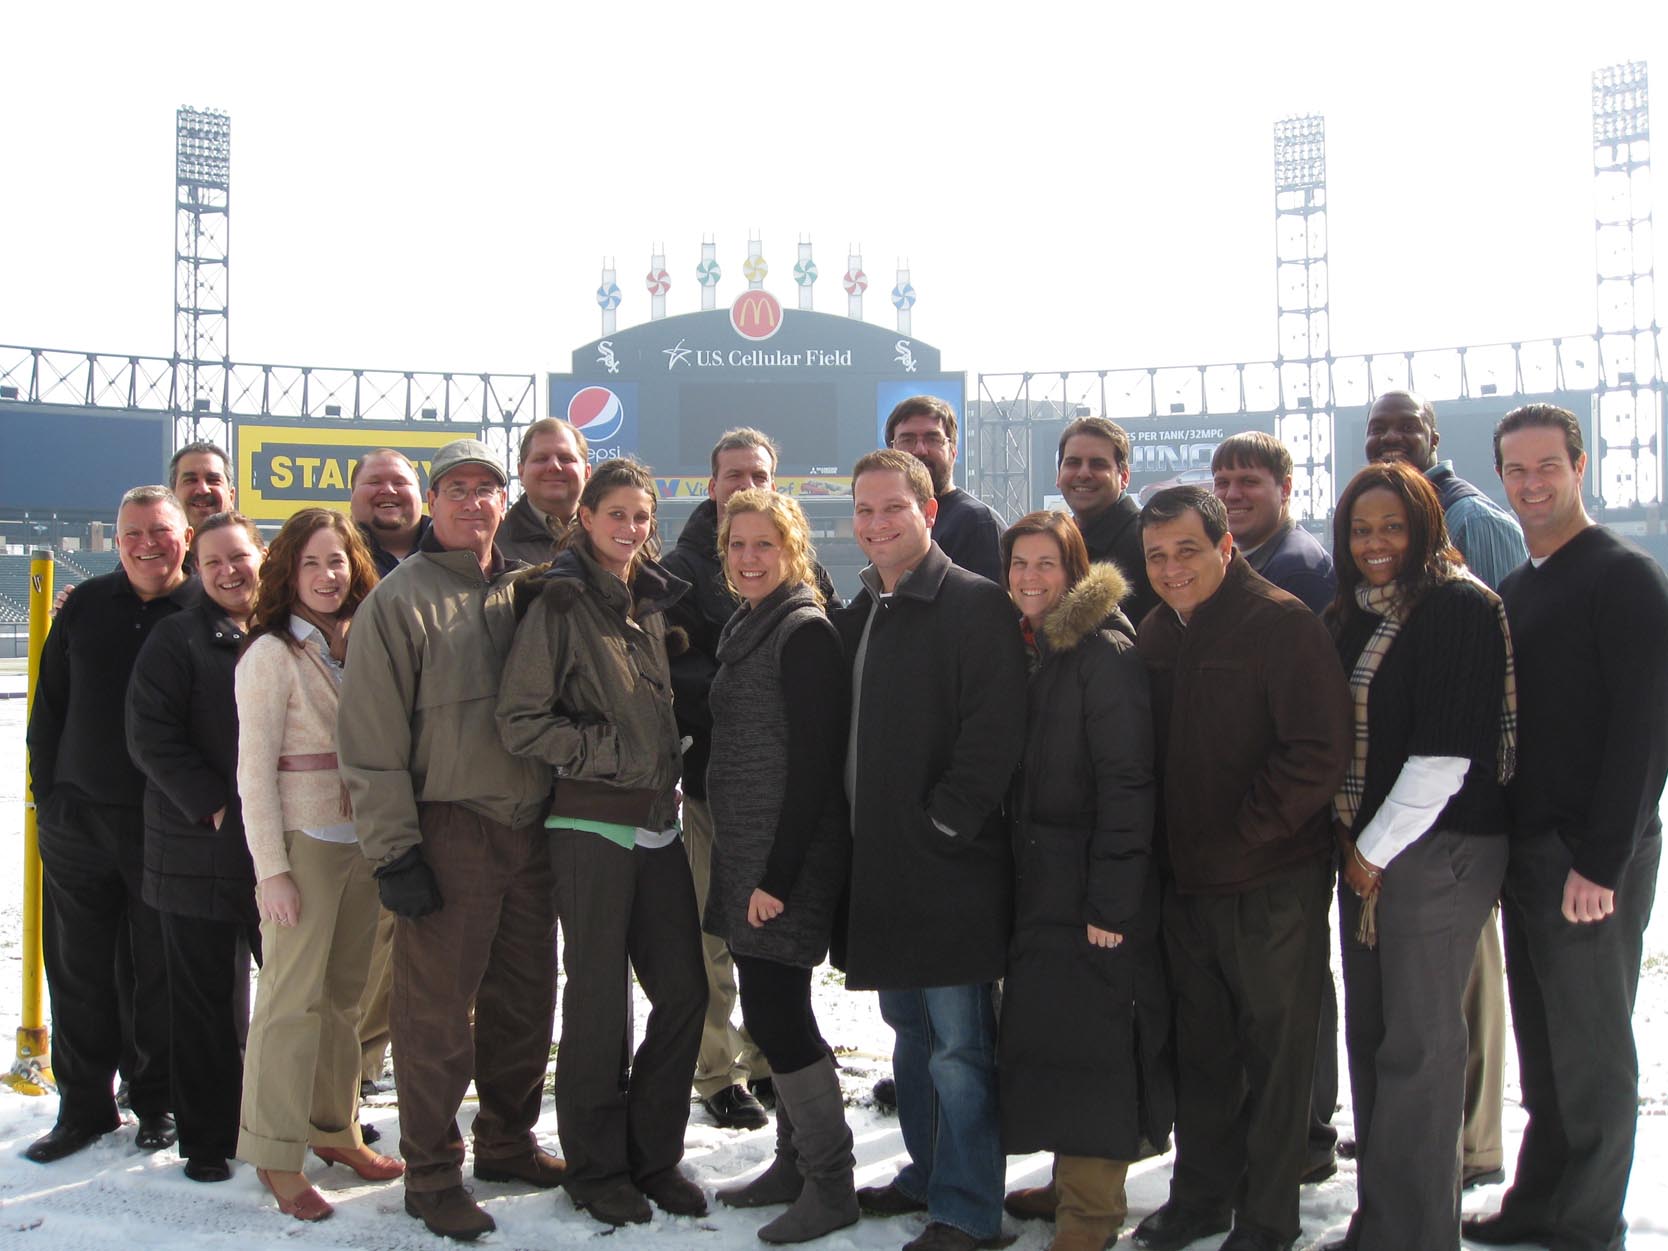 Chicago IDP attendees avoided the snow and took the field.